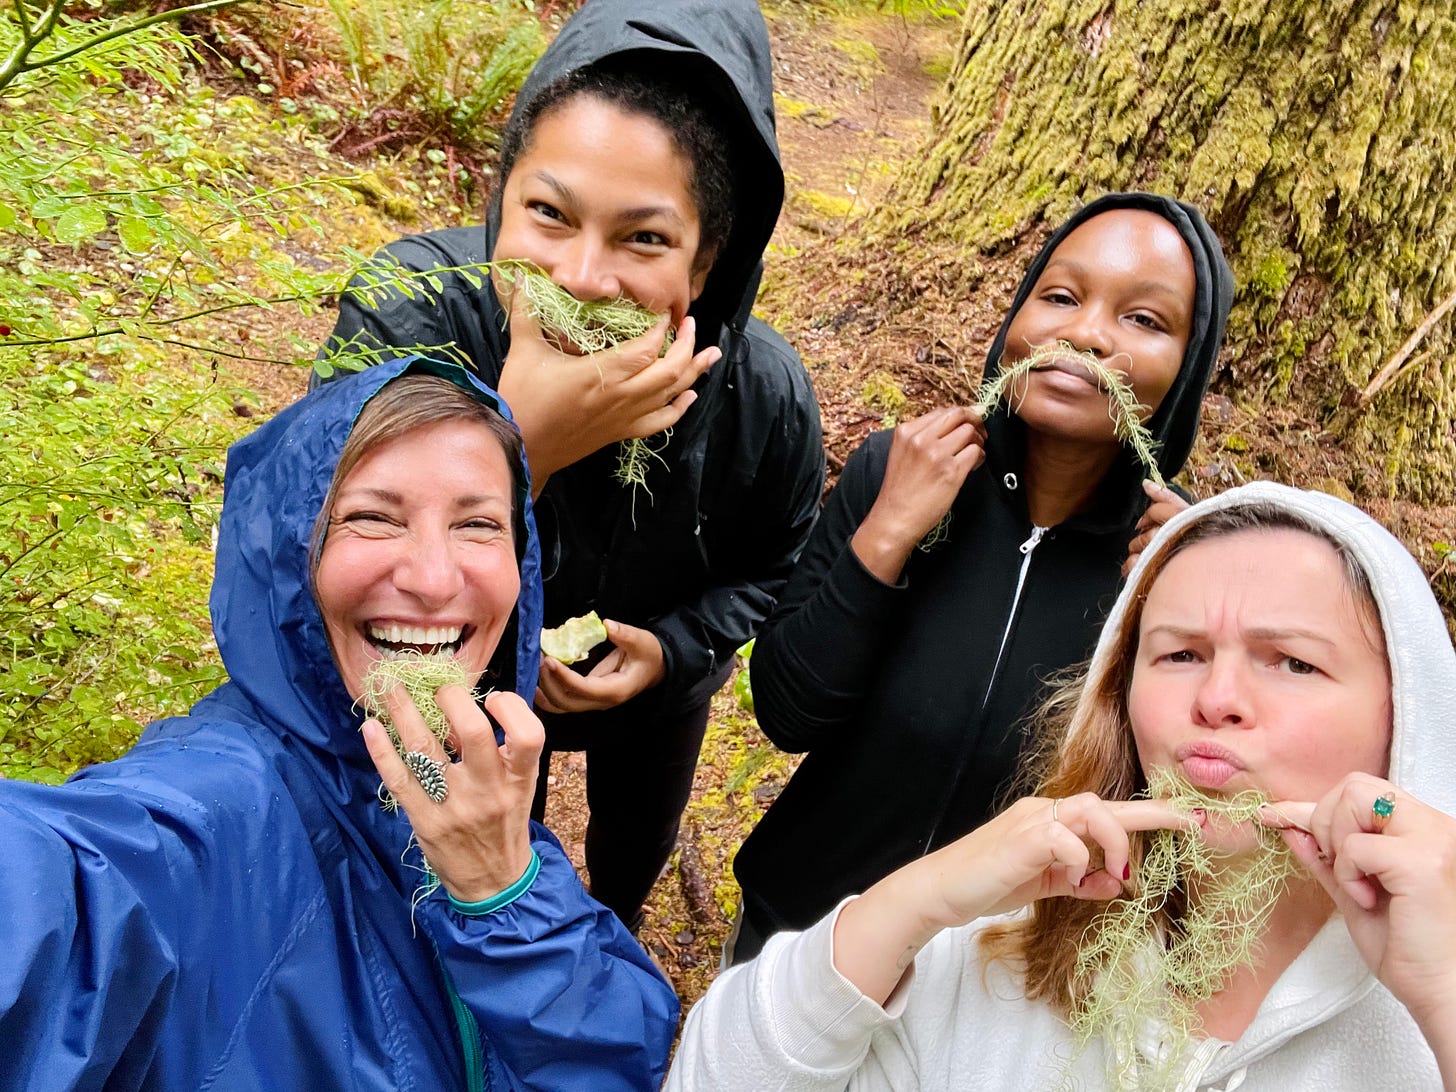 Nicole, Amber, Jackie, and Nafissa stand on a trail in the woods on a rainy day. Nicole is taking a selfie of the group. They each hold parts of a plant up to their faces as if the green hair-like plant is facial hair. 